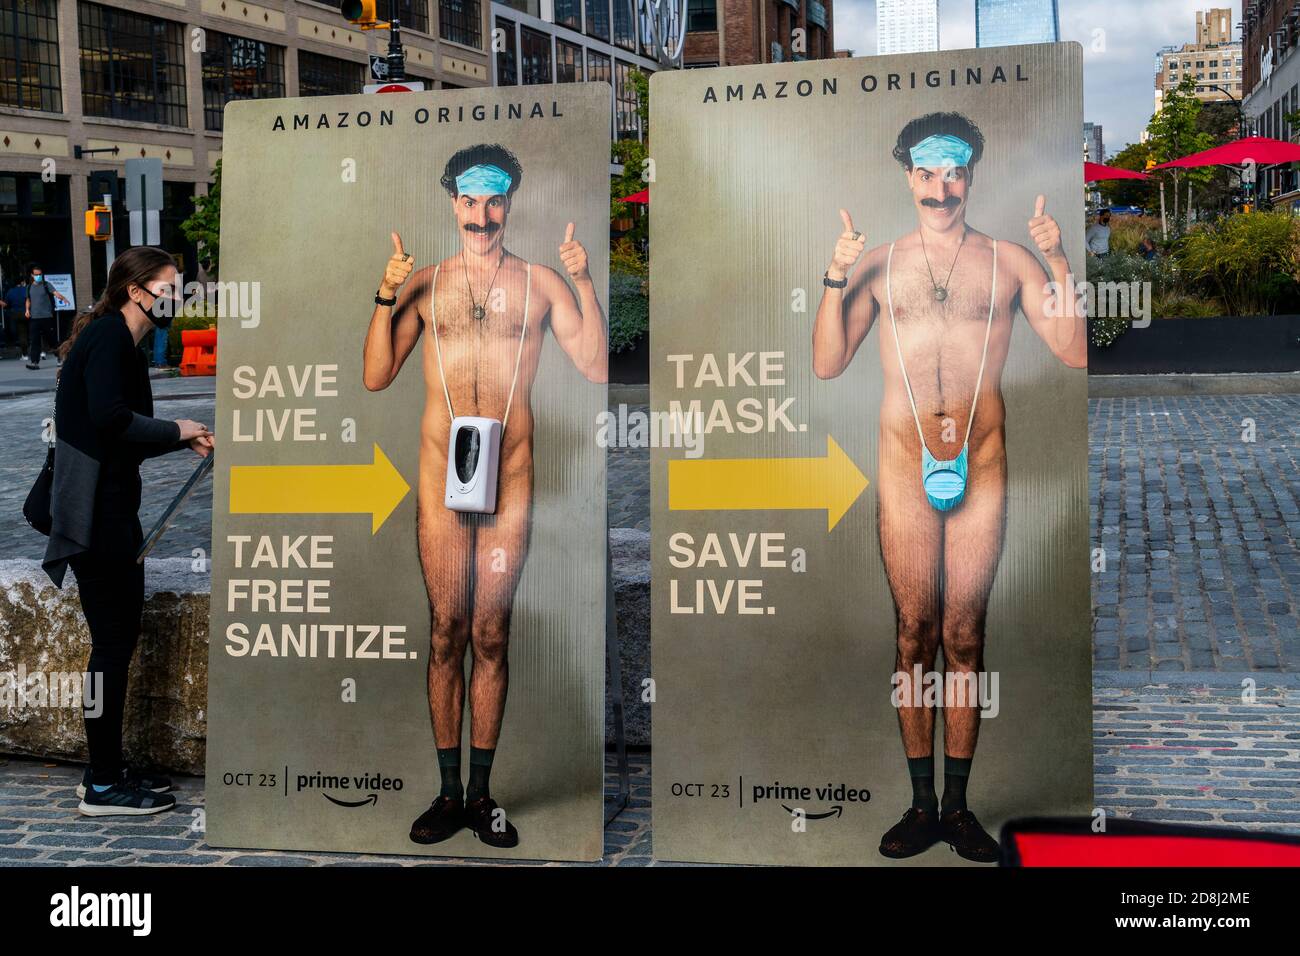 Workers prepare to pack up a hand sanitizer/mask give away brand activation for “Borat Subsequent Moviefilm” in the Meatpacking District in New York on Friday, October 23, 2020. The Sacha Baron Cohen film premieres today on Amazon Prime. (© Richard B. Levine) Stock Photo